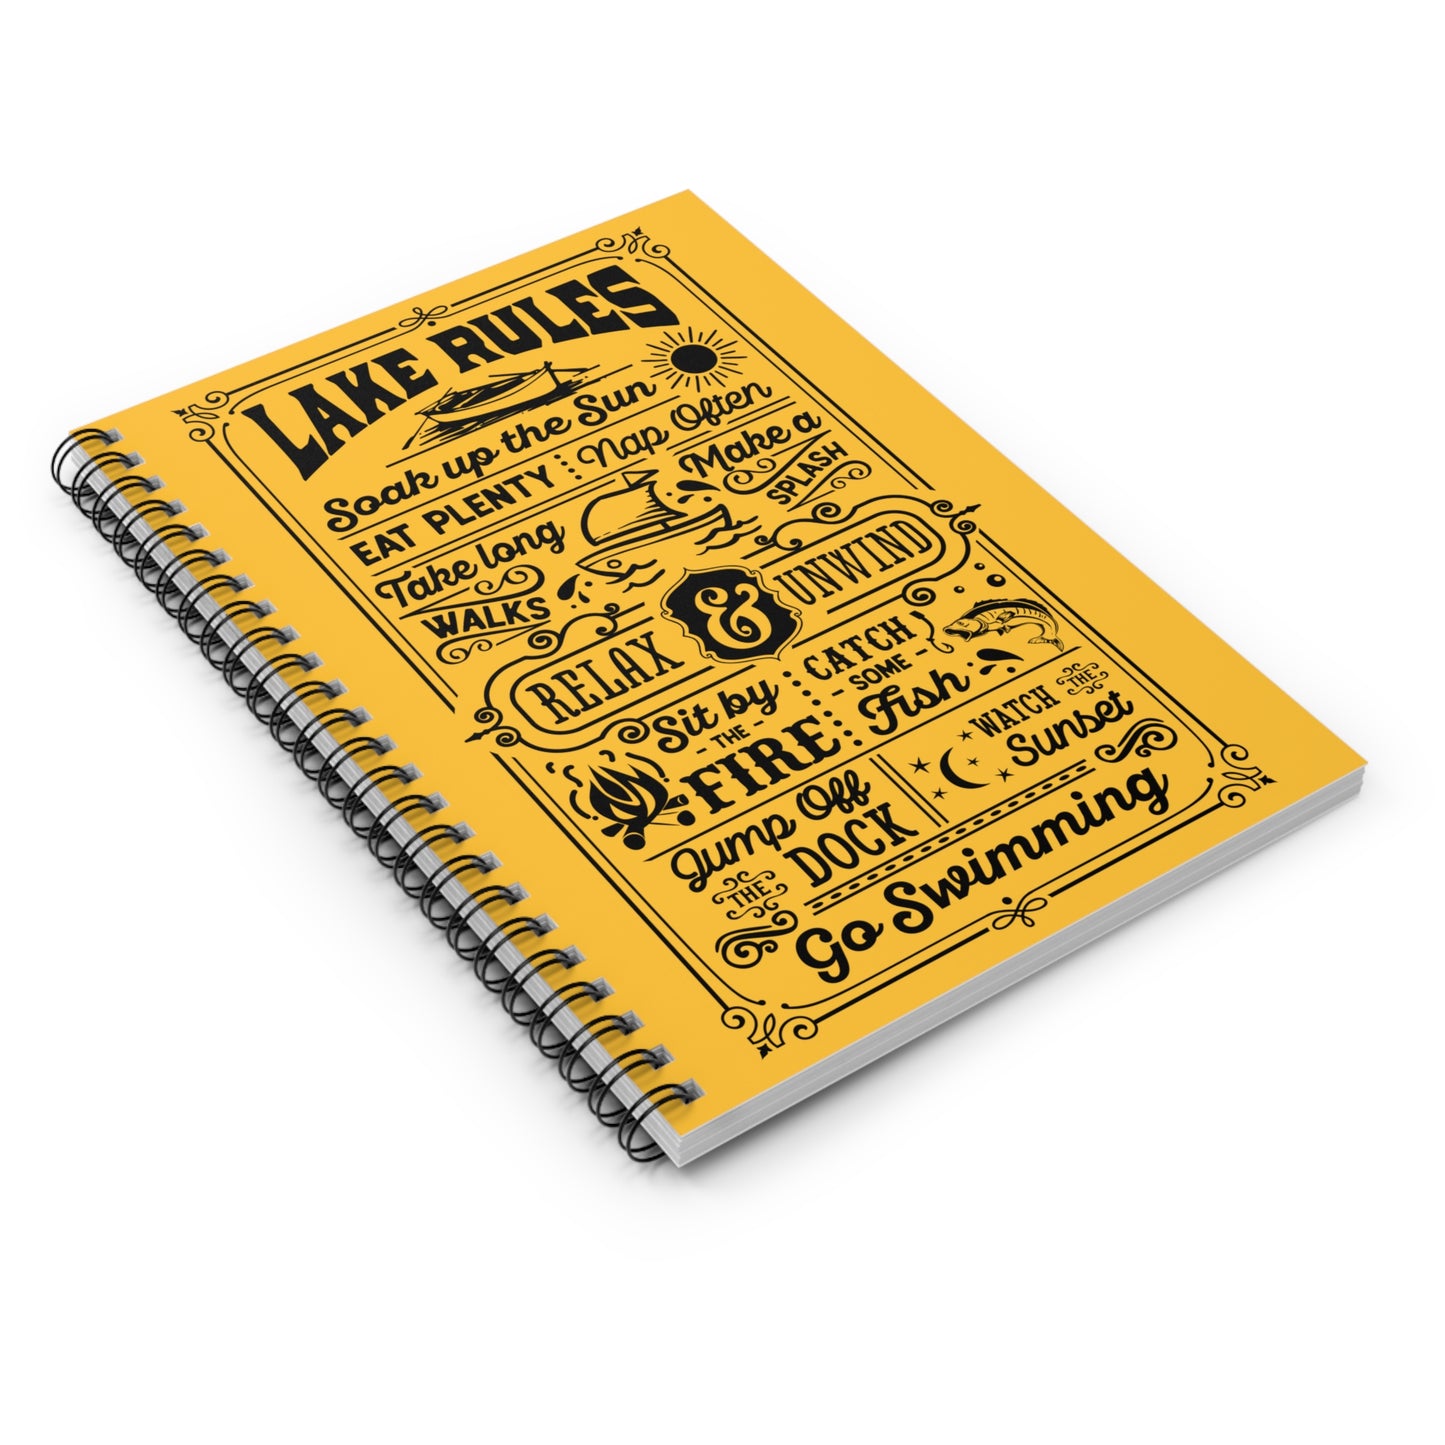 Lake Rules: Spiral Notebook - Log Books - Journals - Diaries - and More Custom Printed by TheGlassyLass.com